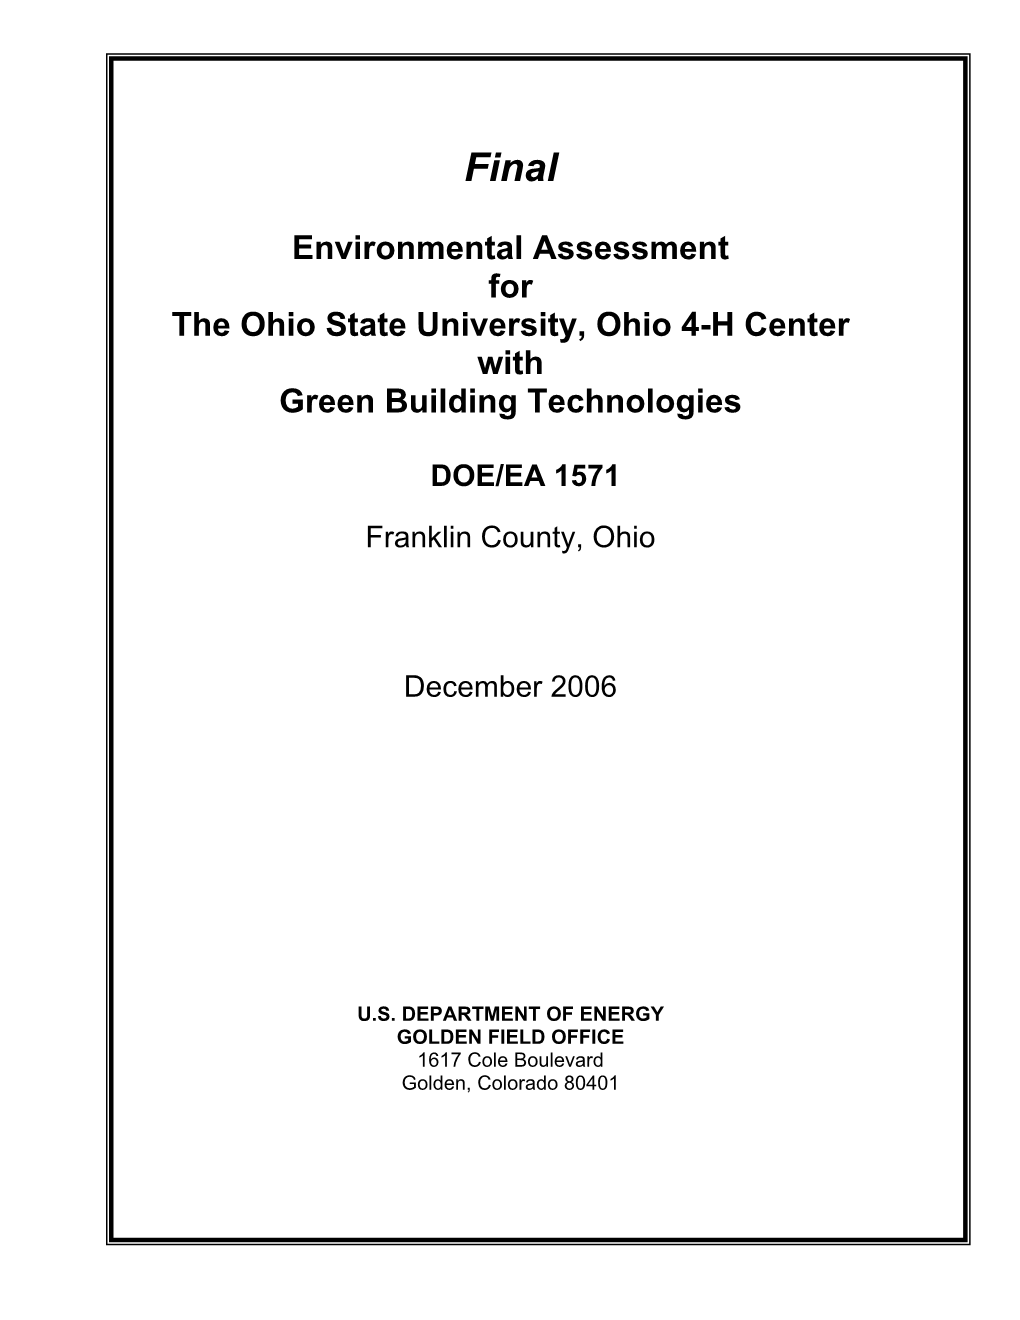 Environmental Assessment for the Ohio State University, Ohio 4-H Center with Green Building Technologies